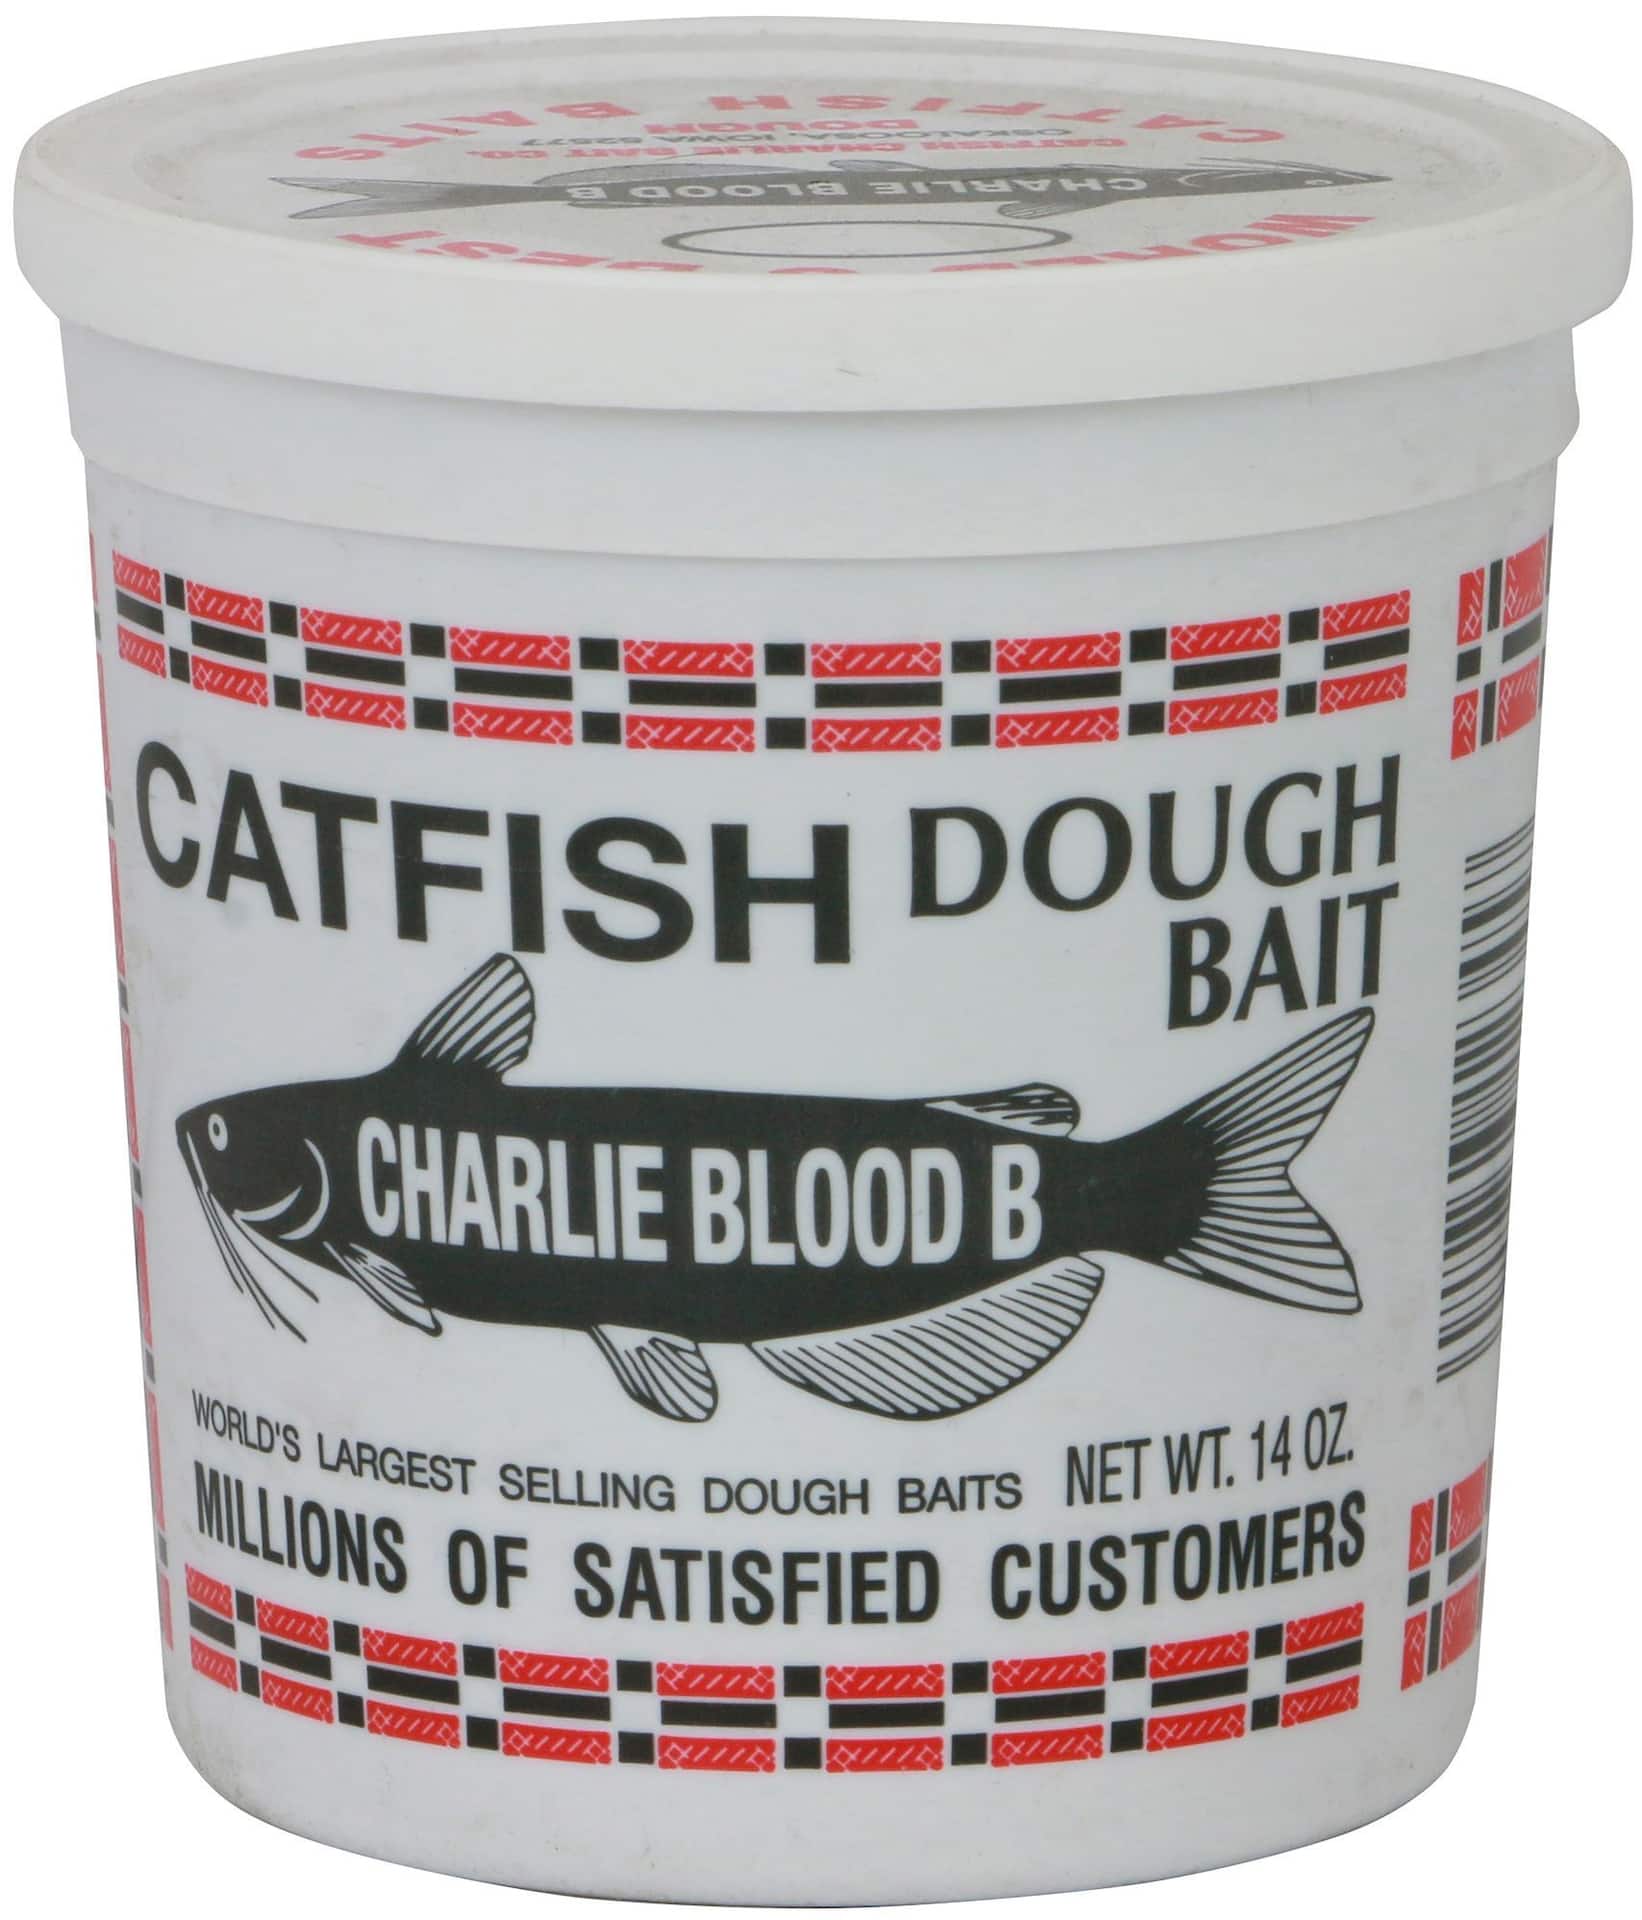 https://media-www.canadiantire.ca/product/playing/fishing/fishing-lures/1780054/catfish-charlie-blood-bait-type-b-w-blood-lg-e399a0ed-e935-401a-a5f4-13da27e14074-jpgrendition.jpg